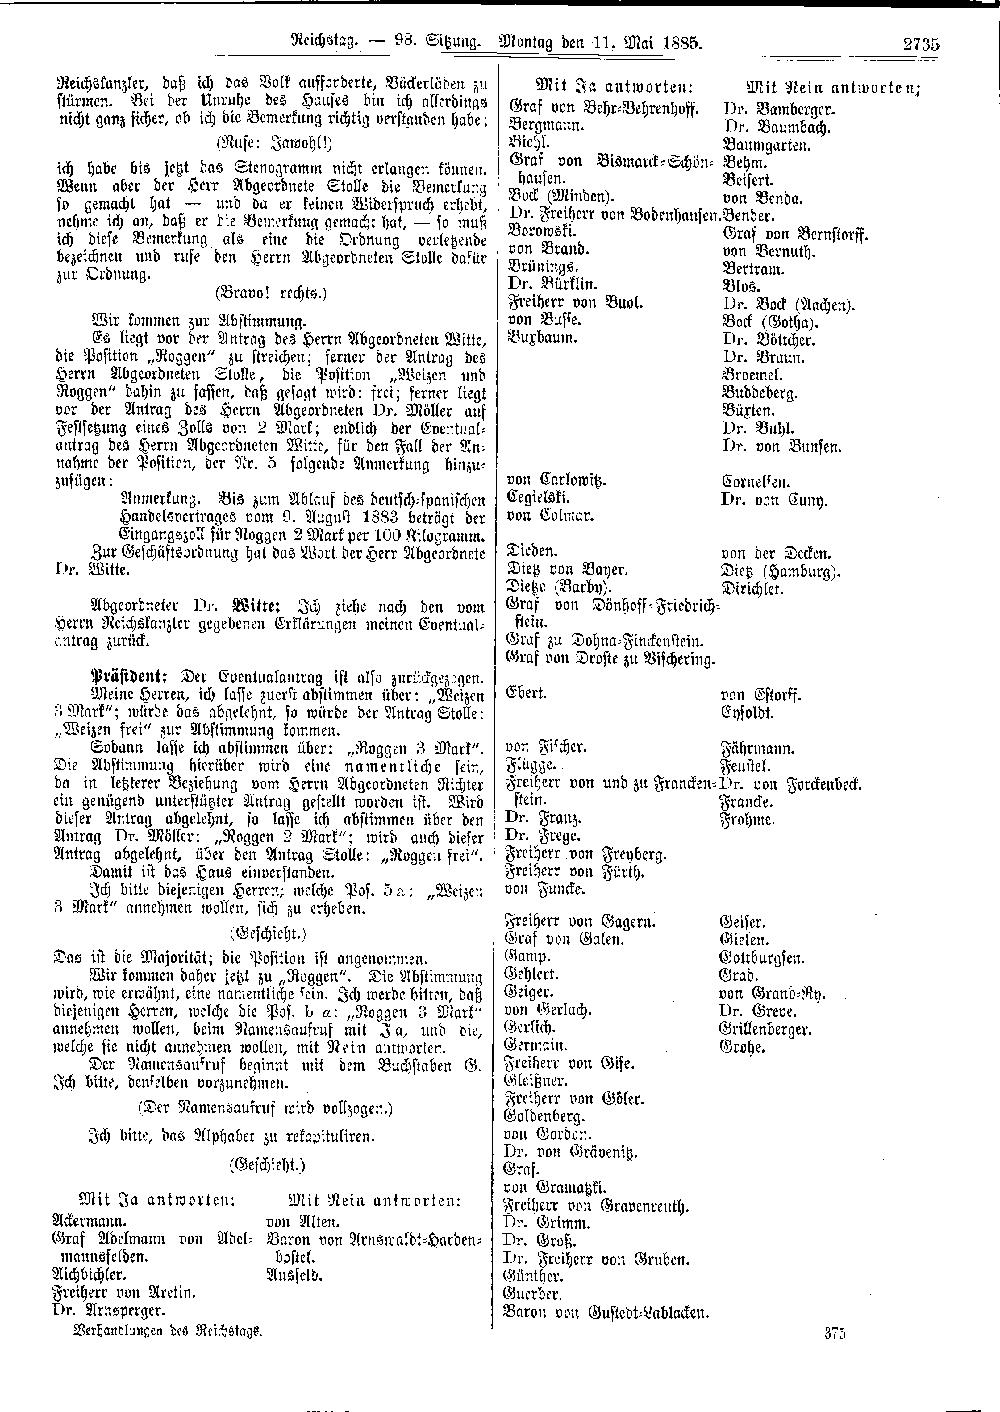 Scan of page 2735